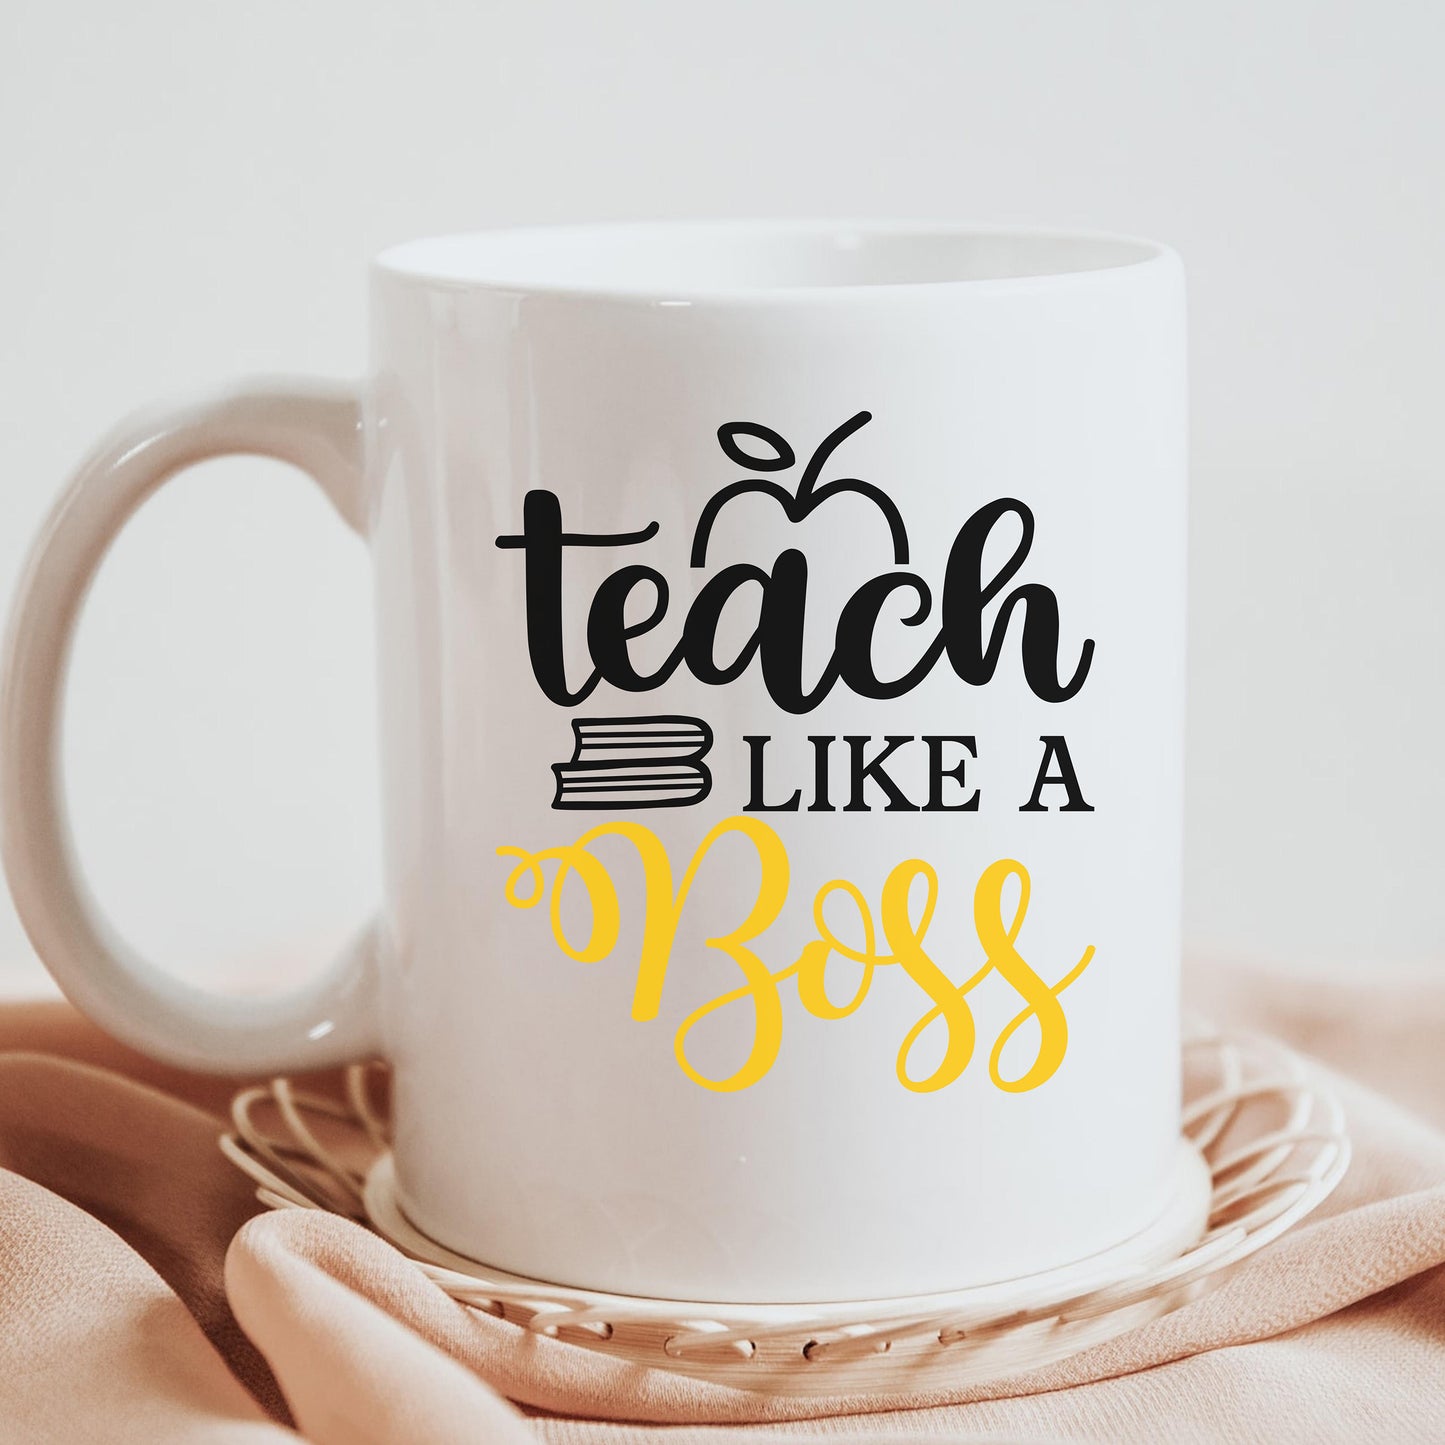 "Teach Like A Boss With Books" Graphic